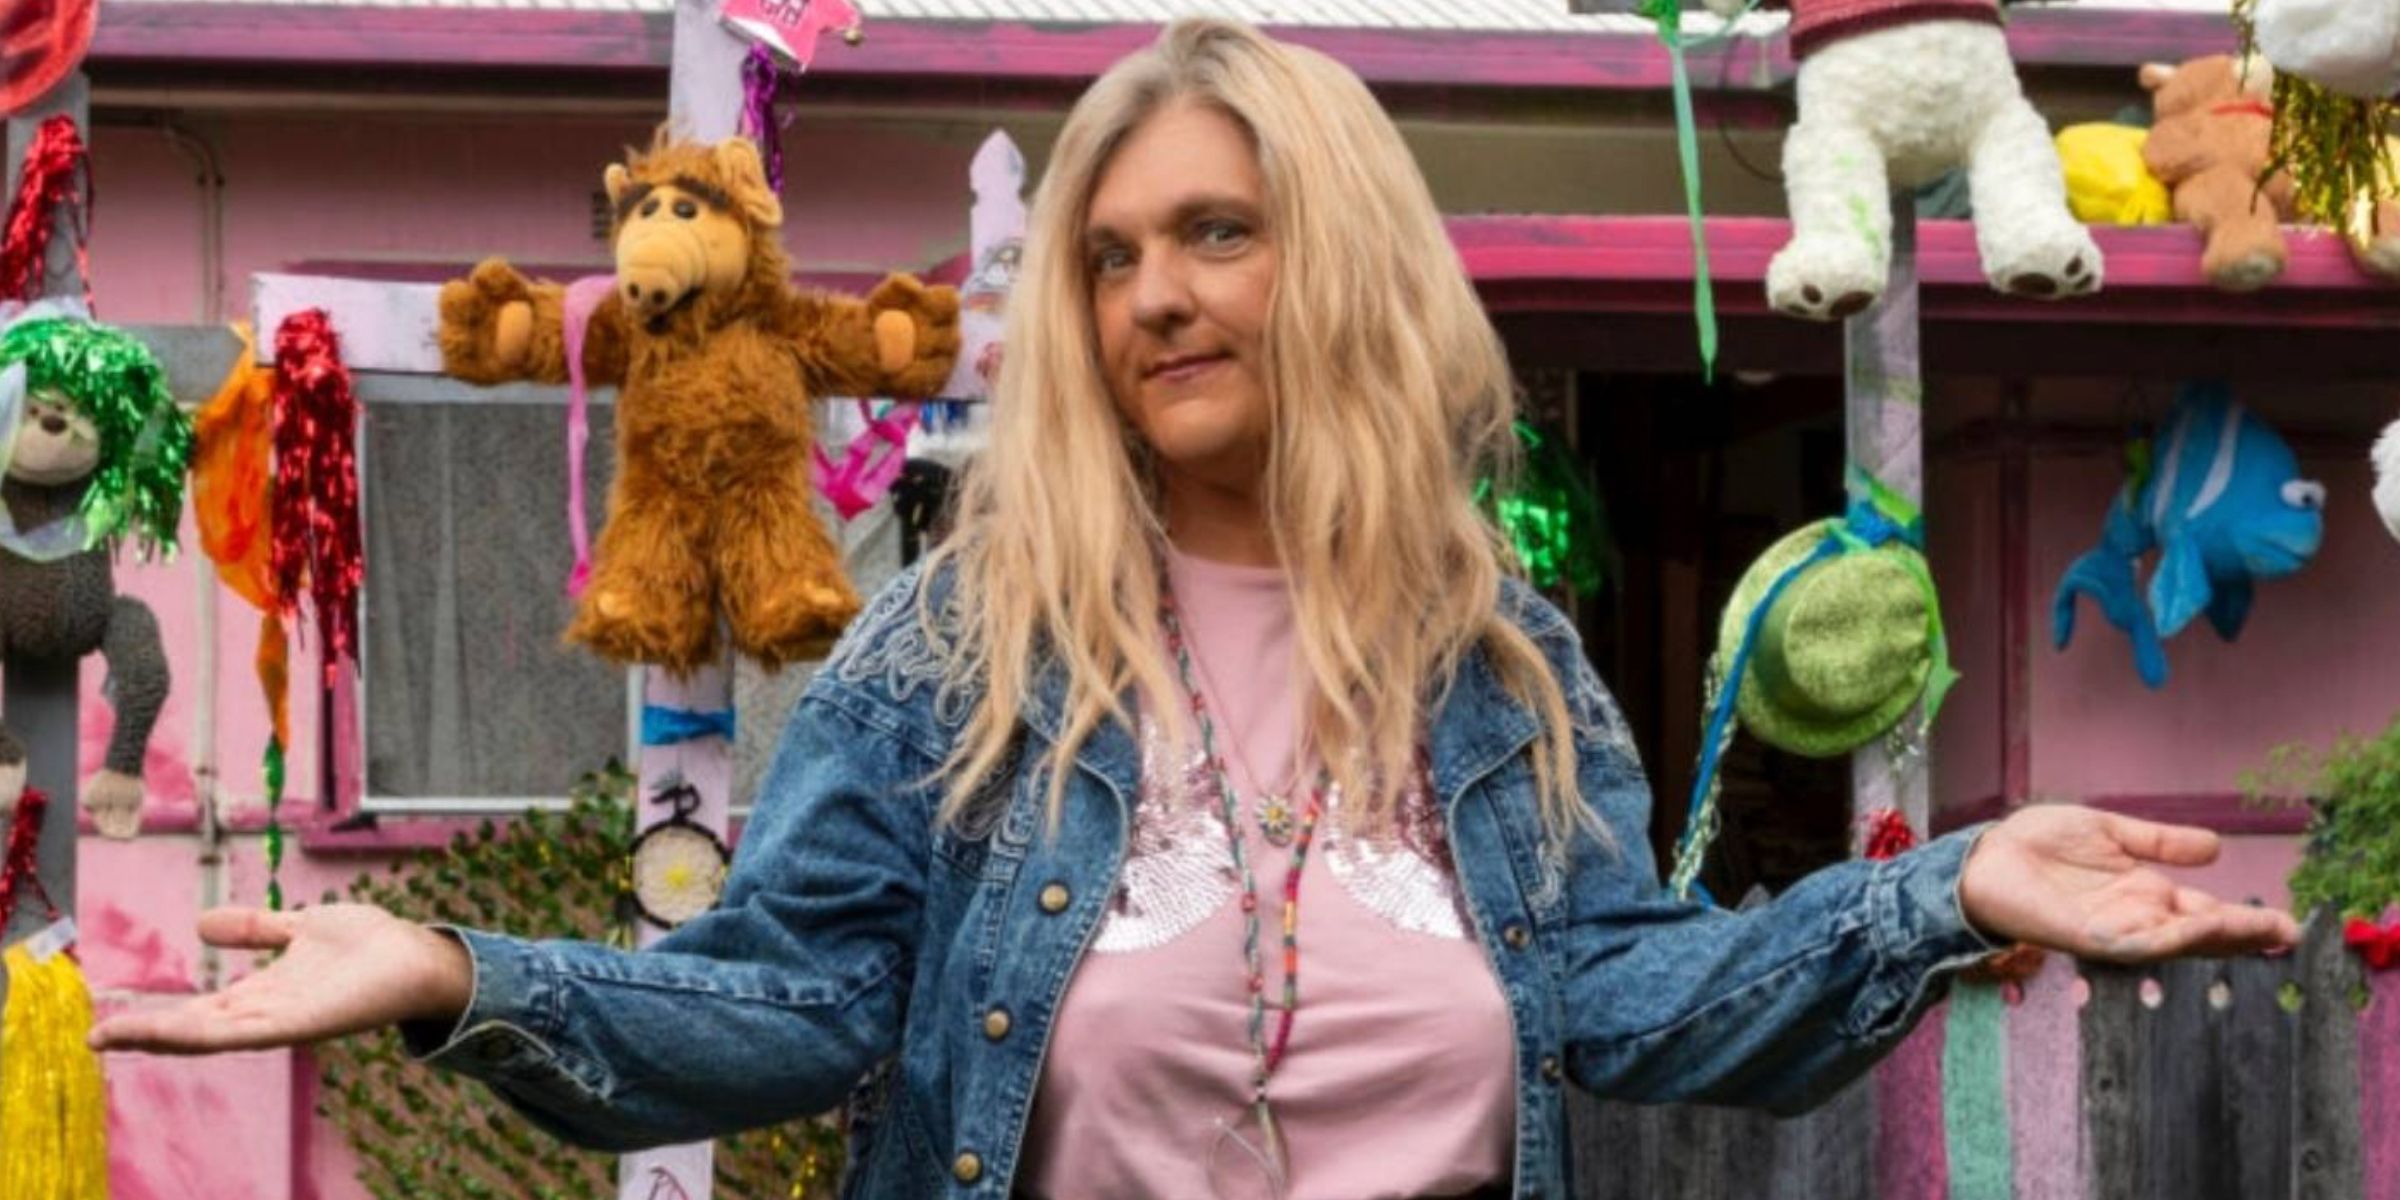 Chris Lilley in a blonde wig and surrounded by stuffed animals in Lunatics